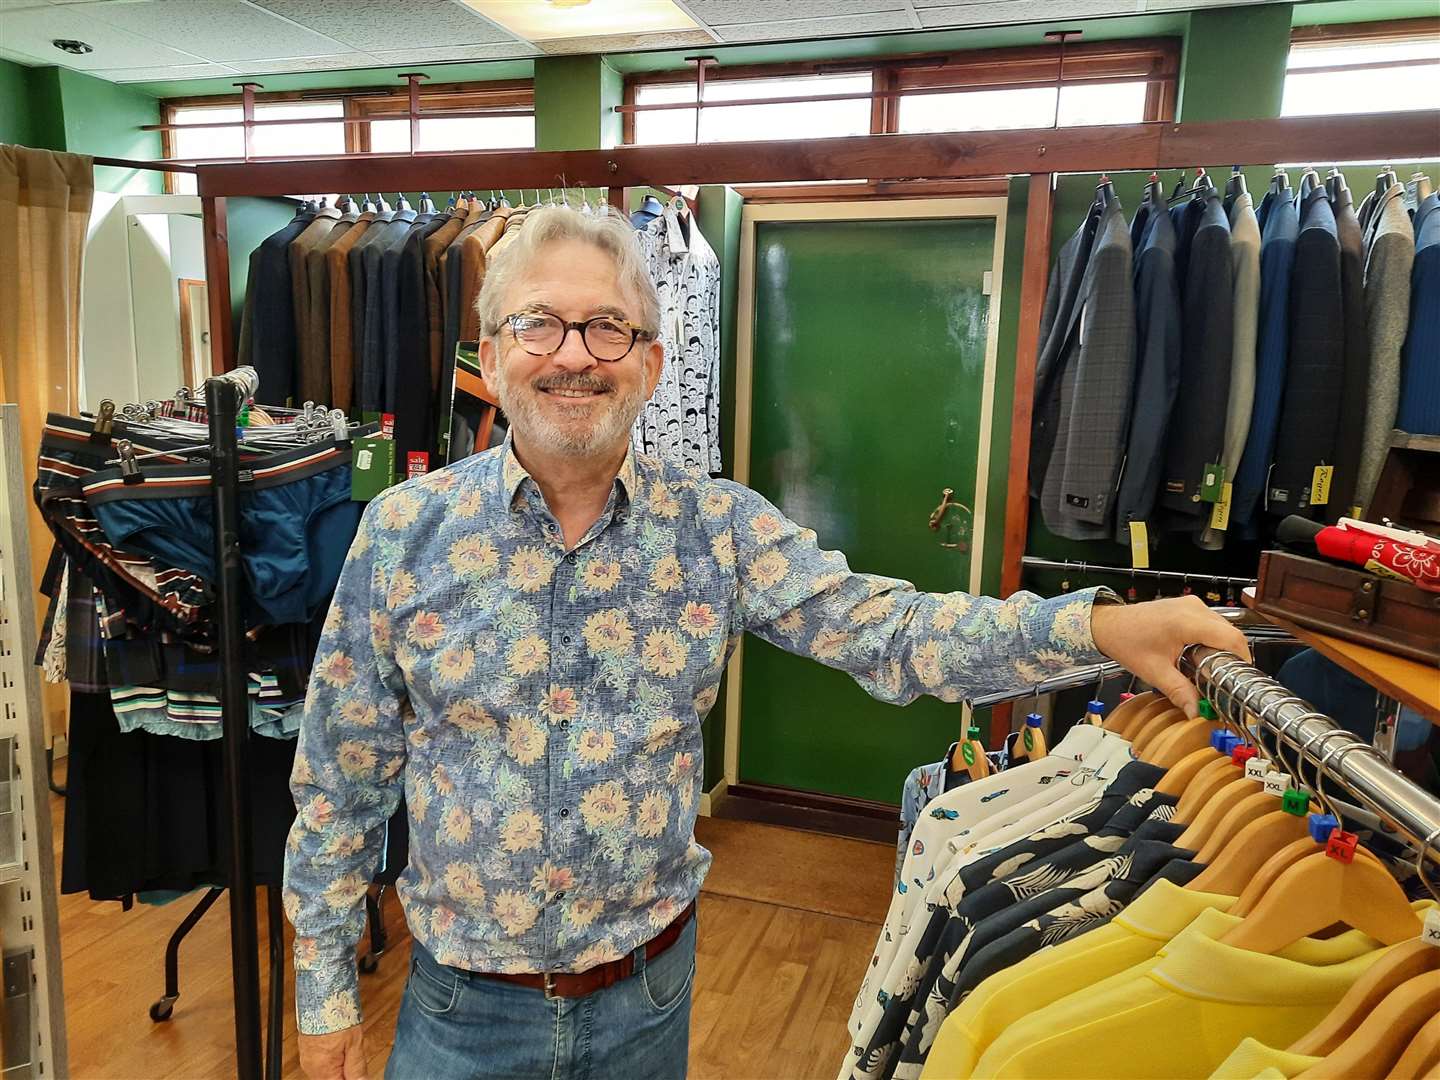 Tony Symons, owner of William Street clothes shop Roger's Menswear in Herne Bay